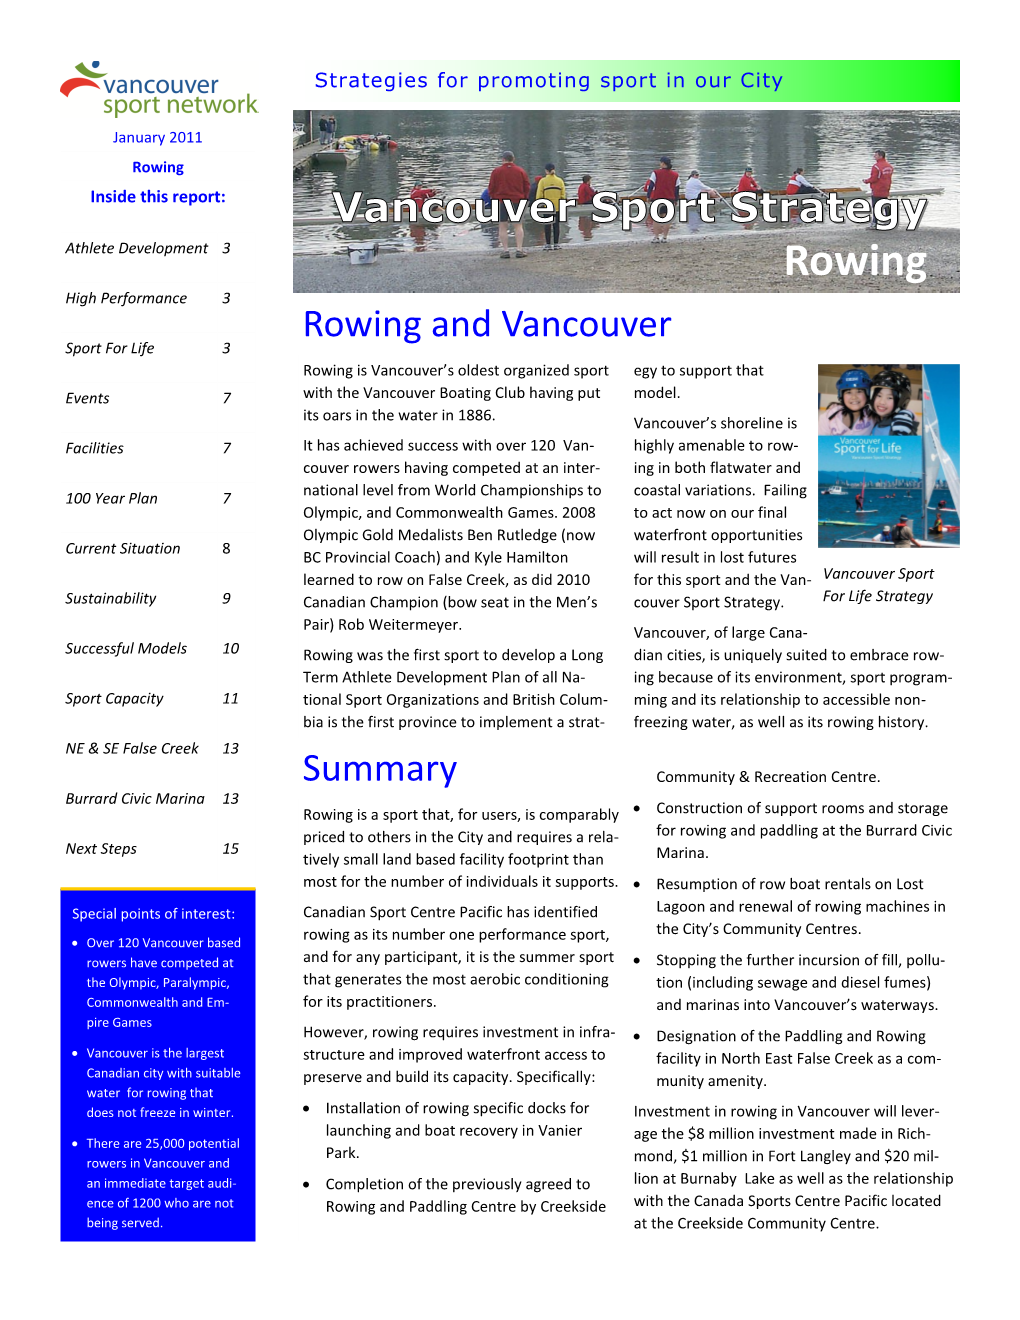 Vancouver Sport Strategy for Rowing